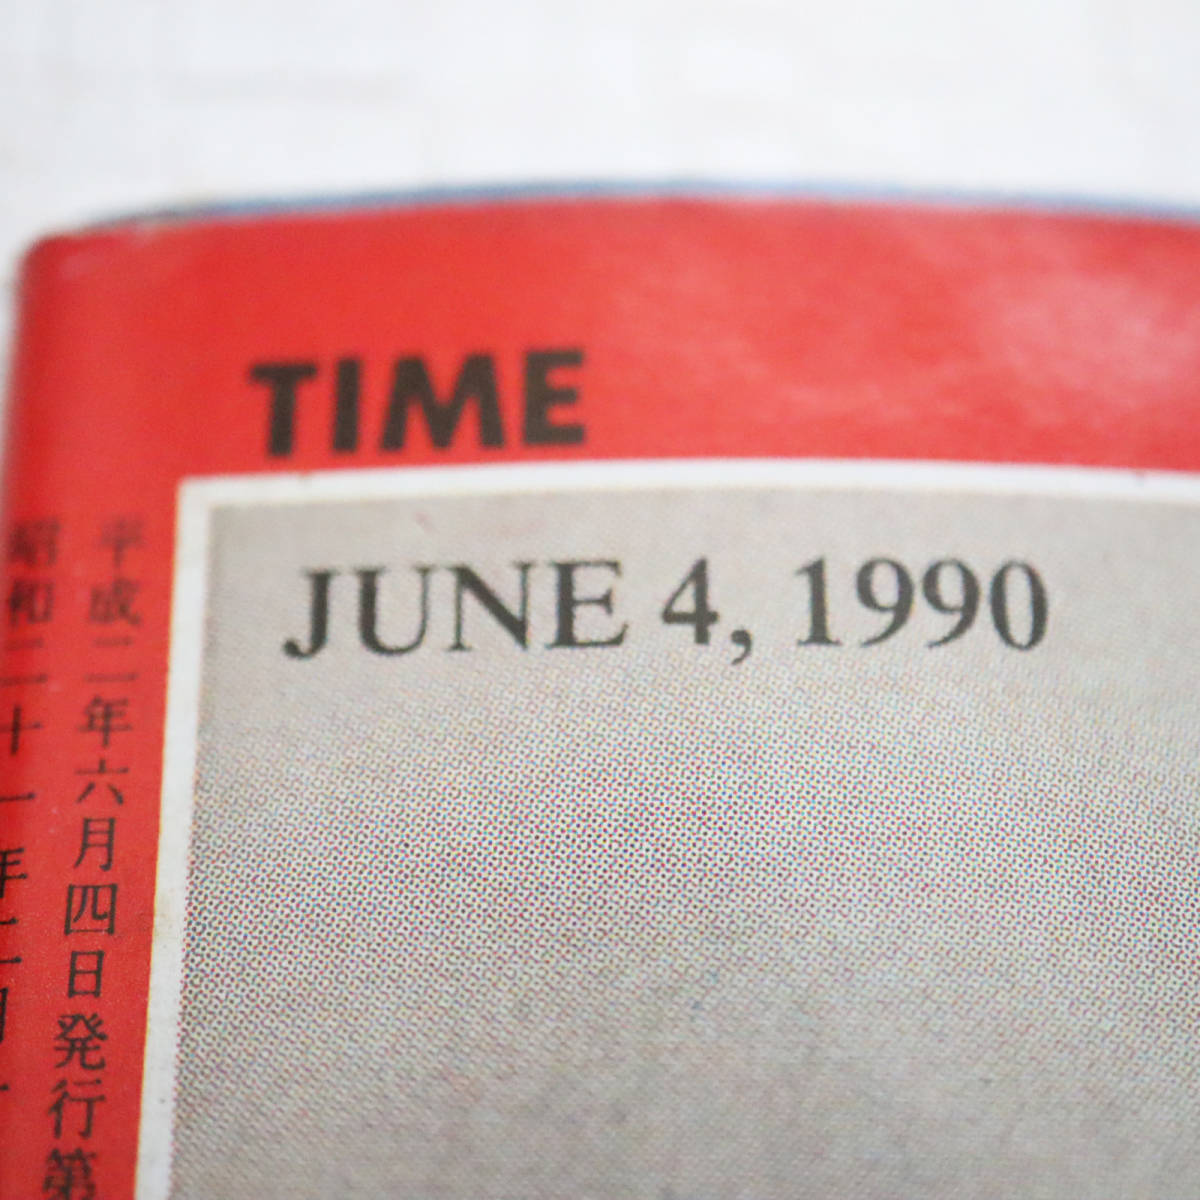 2331　TIME タイム　雑誌　タイムジャパン　1990年6月4日発行　JUNE 4,1990　週刊誌　古雑誌　古書　古本　美品　誕生日プレゼント_画像4